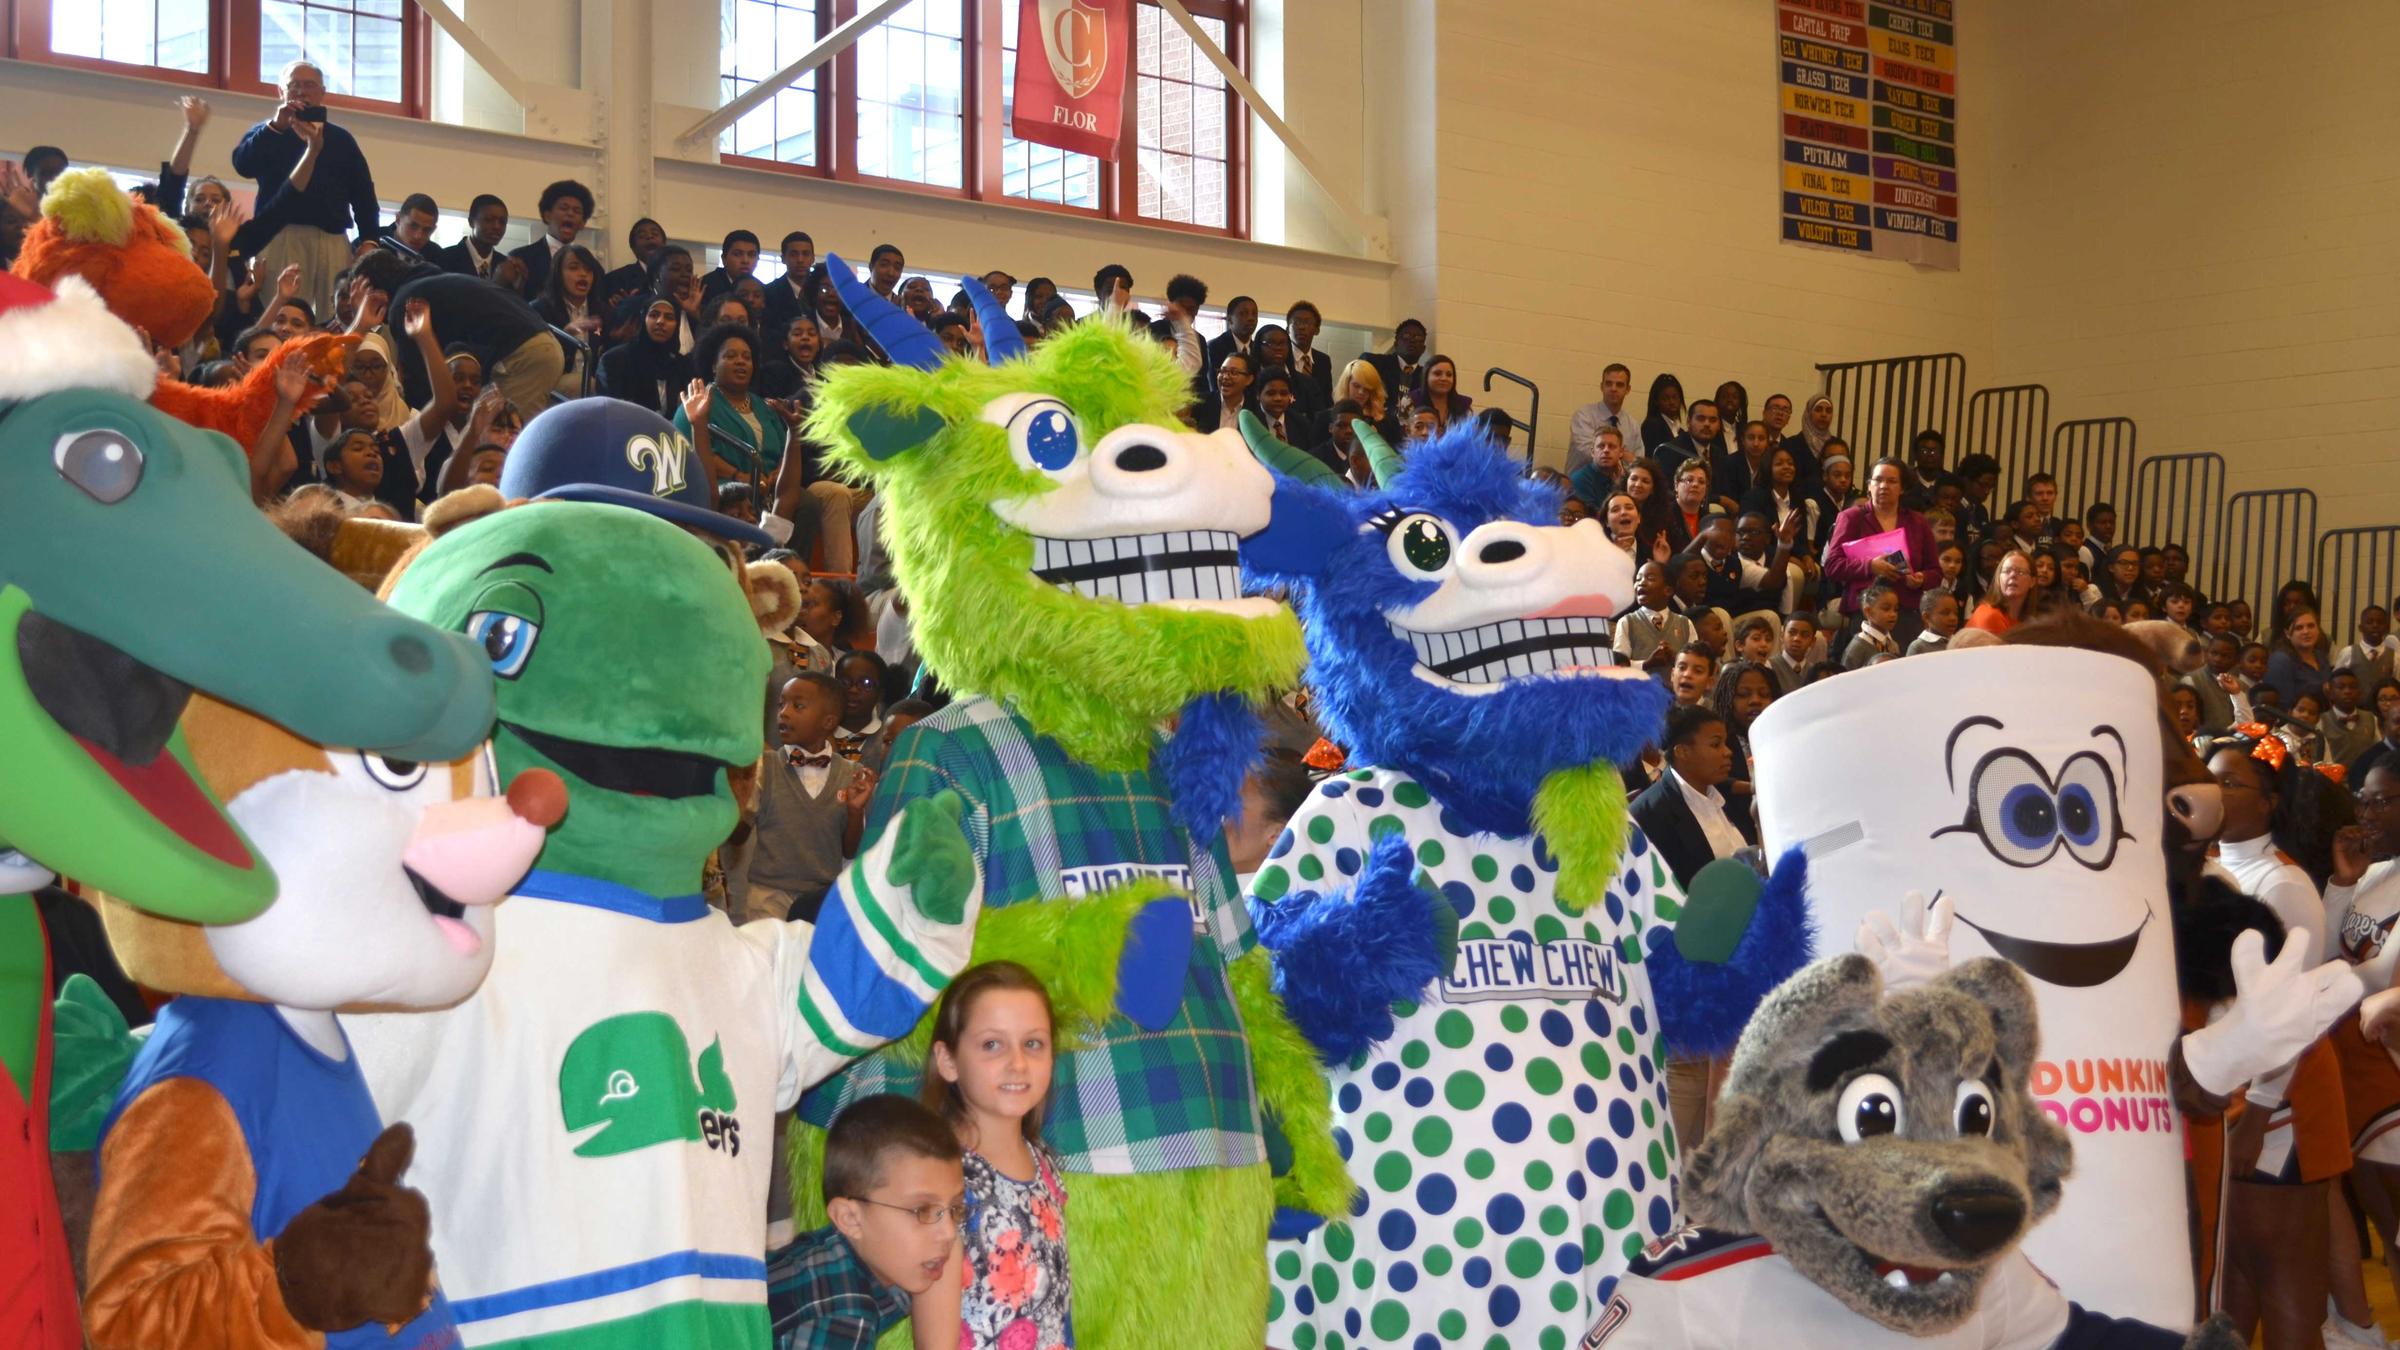 Hartford Yard Goats Unveil Mascots Chompers and Chew Chew | Connecticut ...